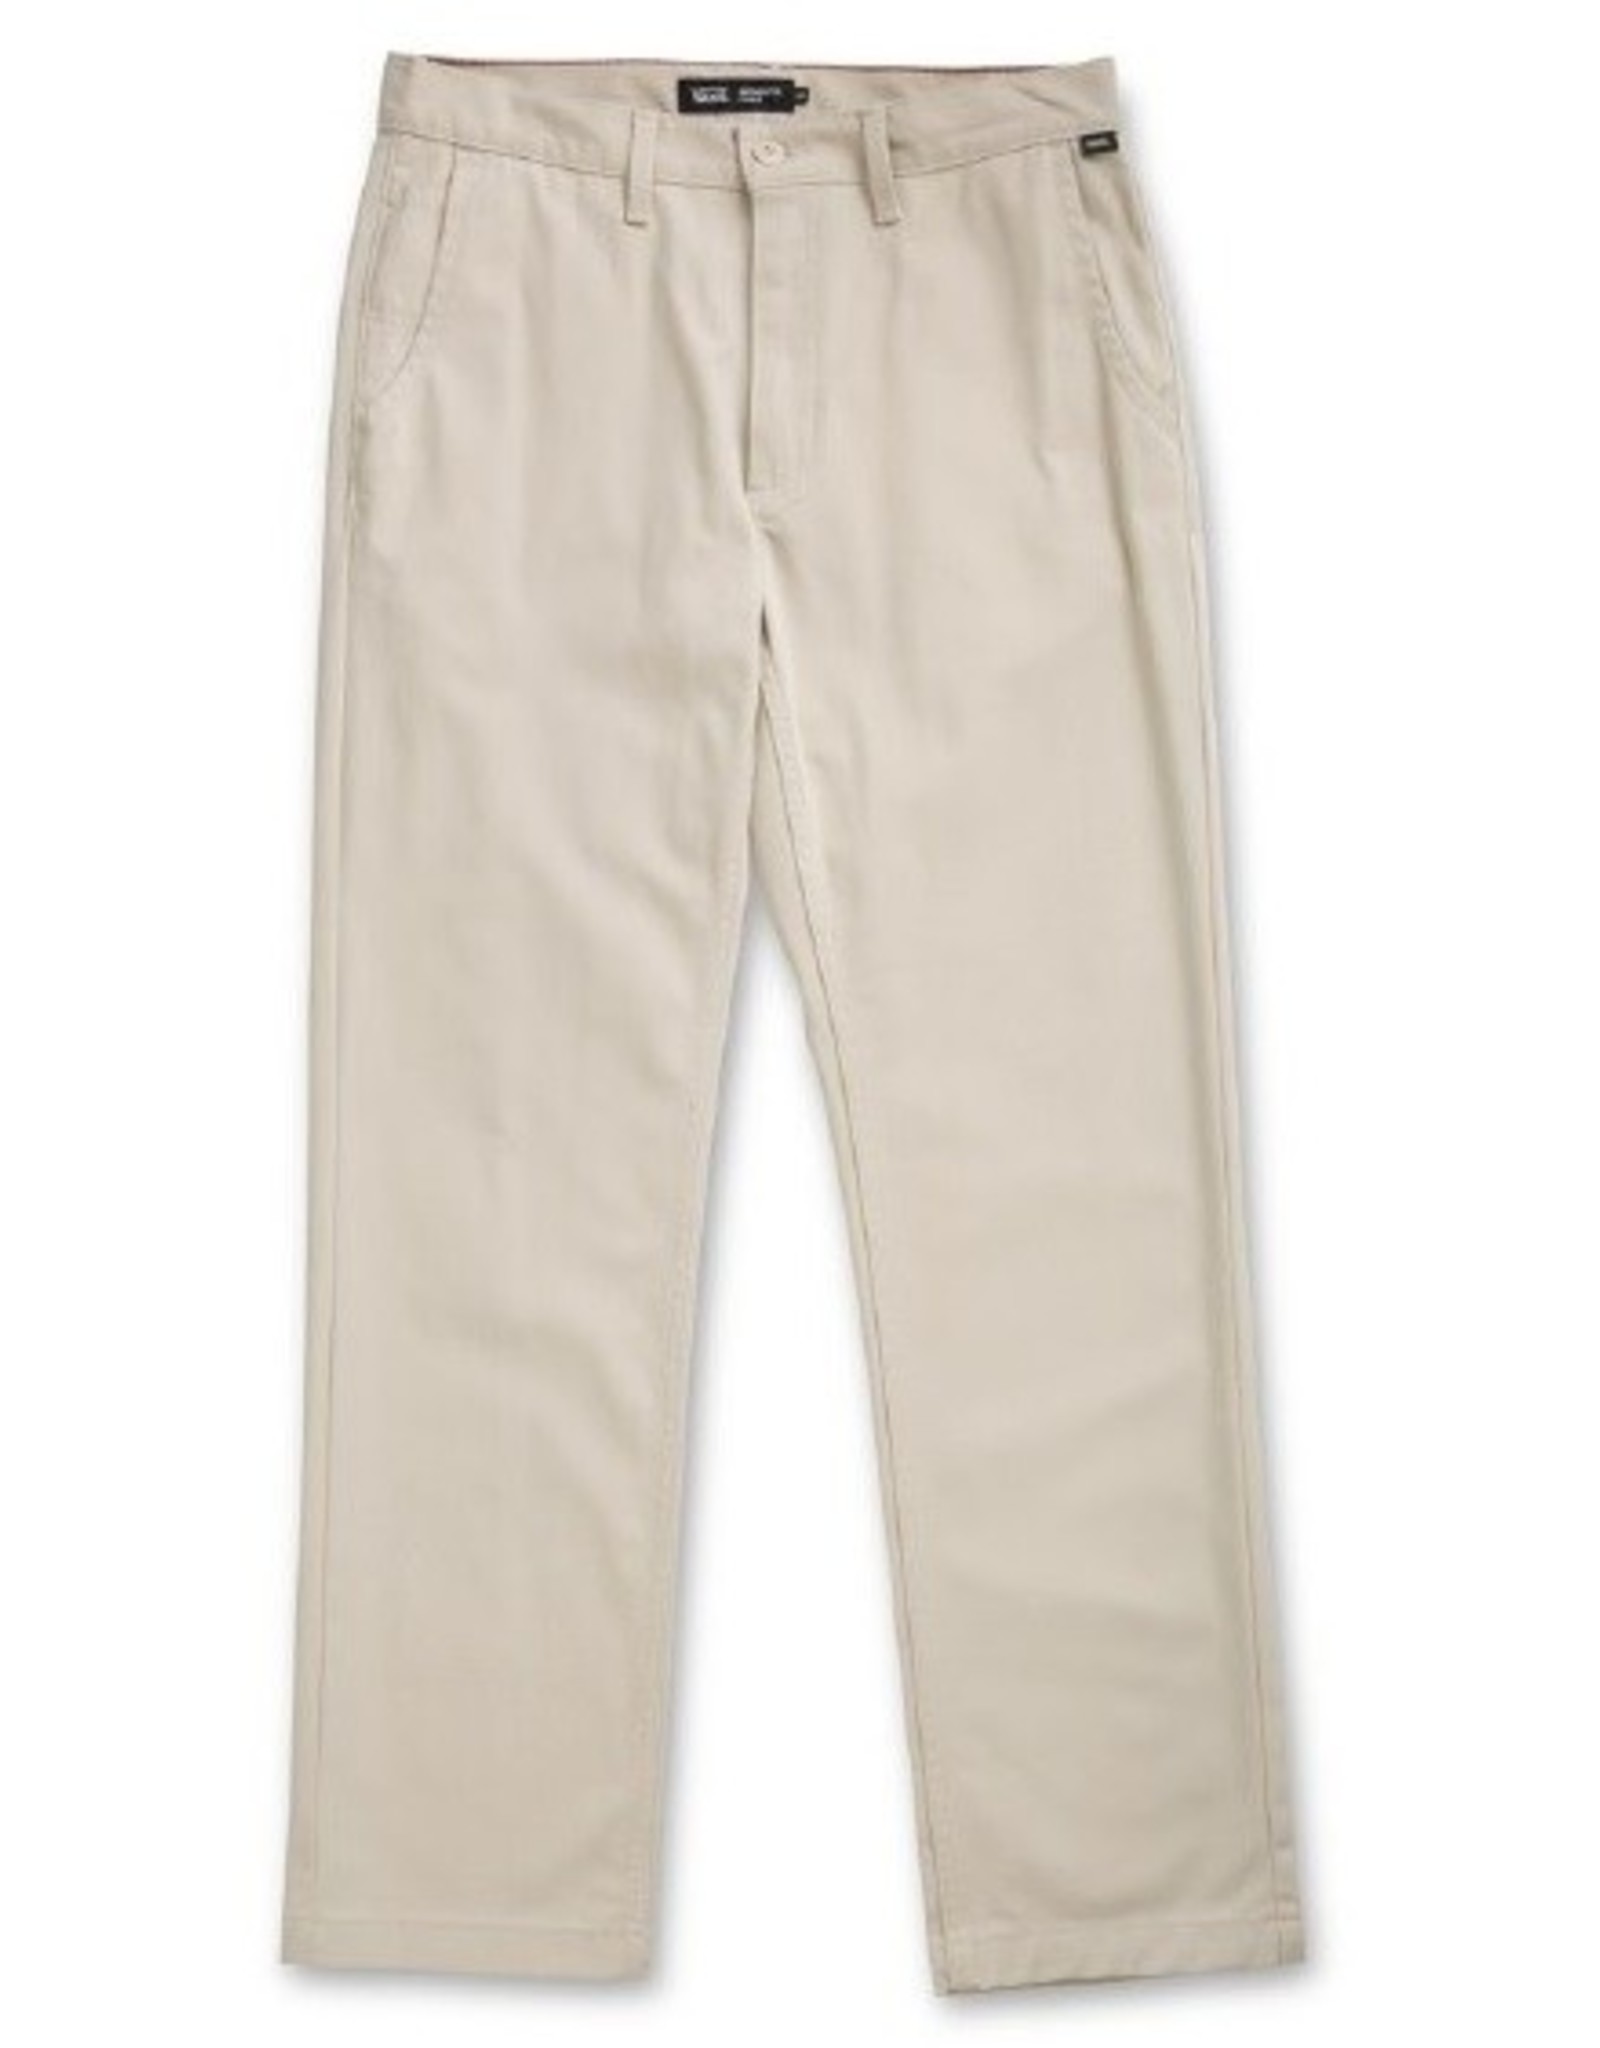 VANS VANS AUTHENTIC CHINO RELAXED PANT - OATMEAL